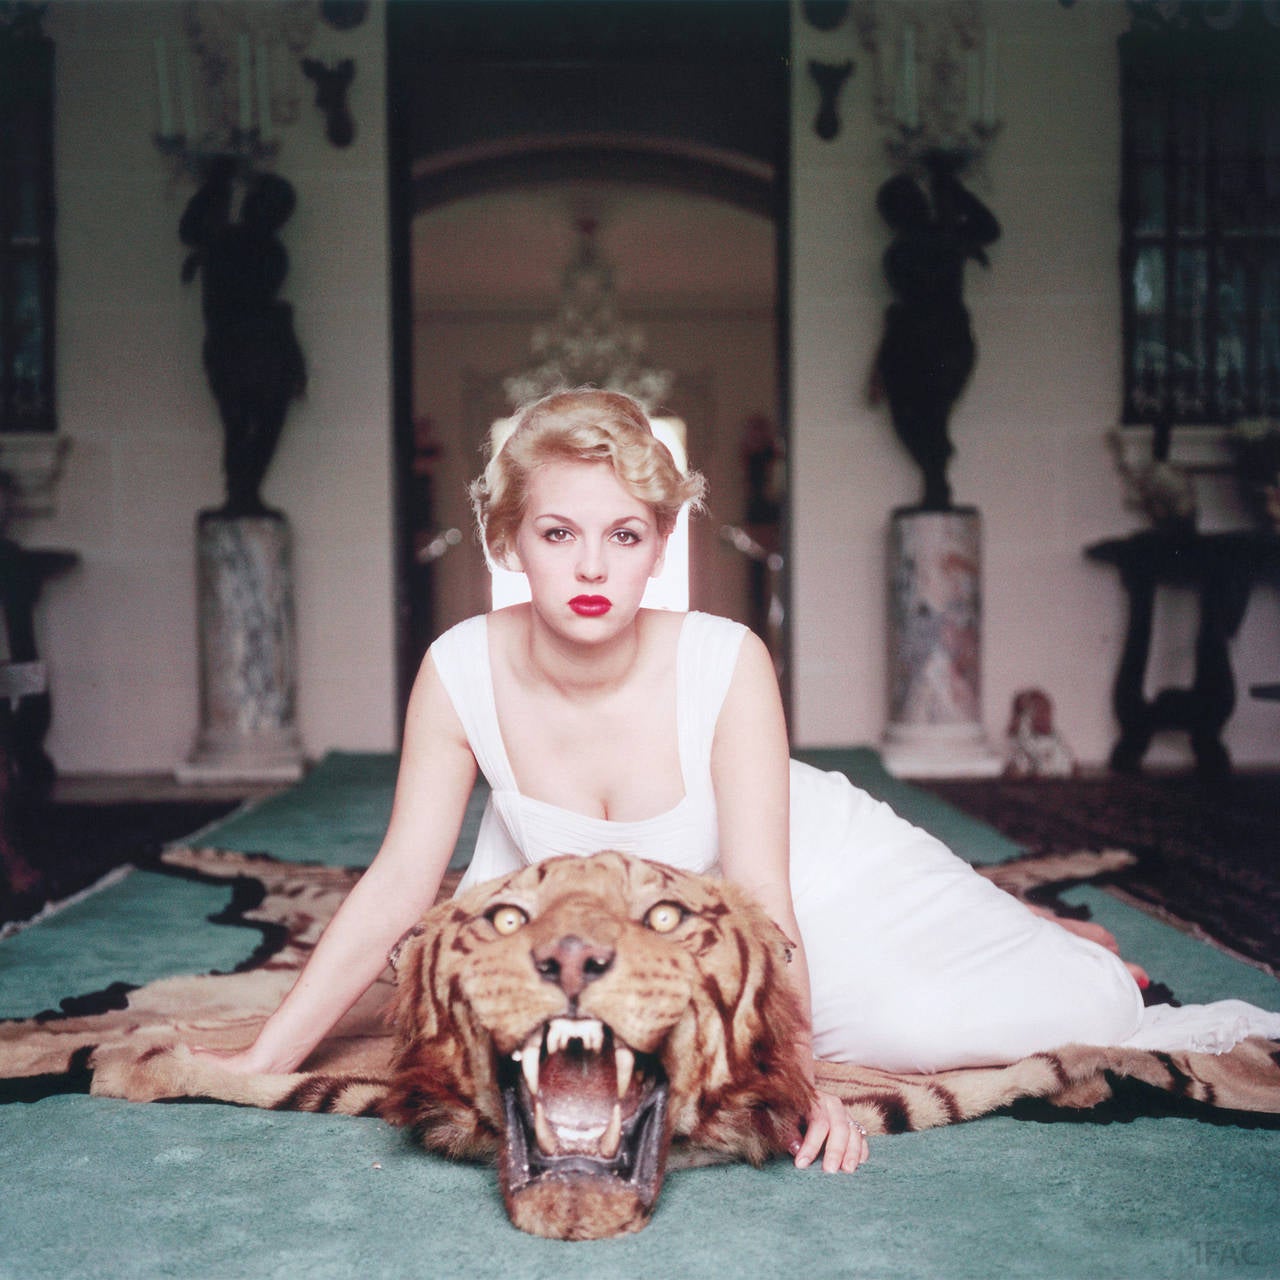 Lady Daphne Cameron (Mrs George Cameron) on a tiger skin rug in the trophy room at socialite Laddie Sanford's home in Palm Beach, Florida.

Estate stamped and hand numbered edition of 150 with certificate of authenticity from the estate. 

Slim